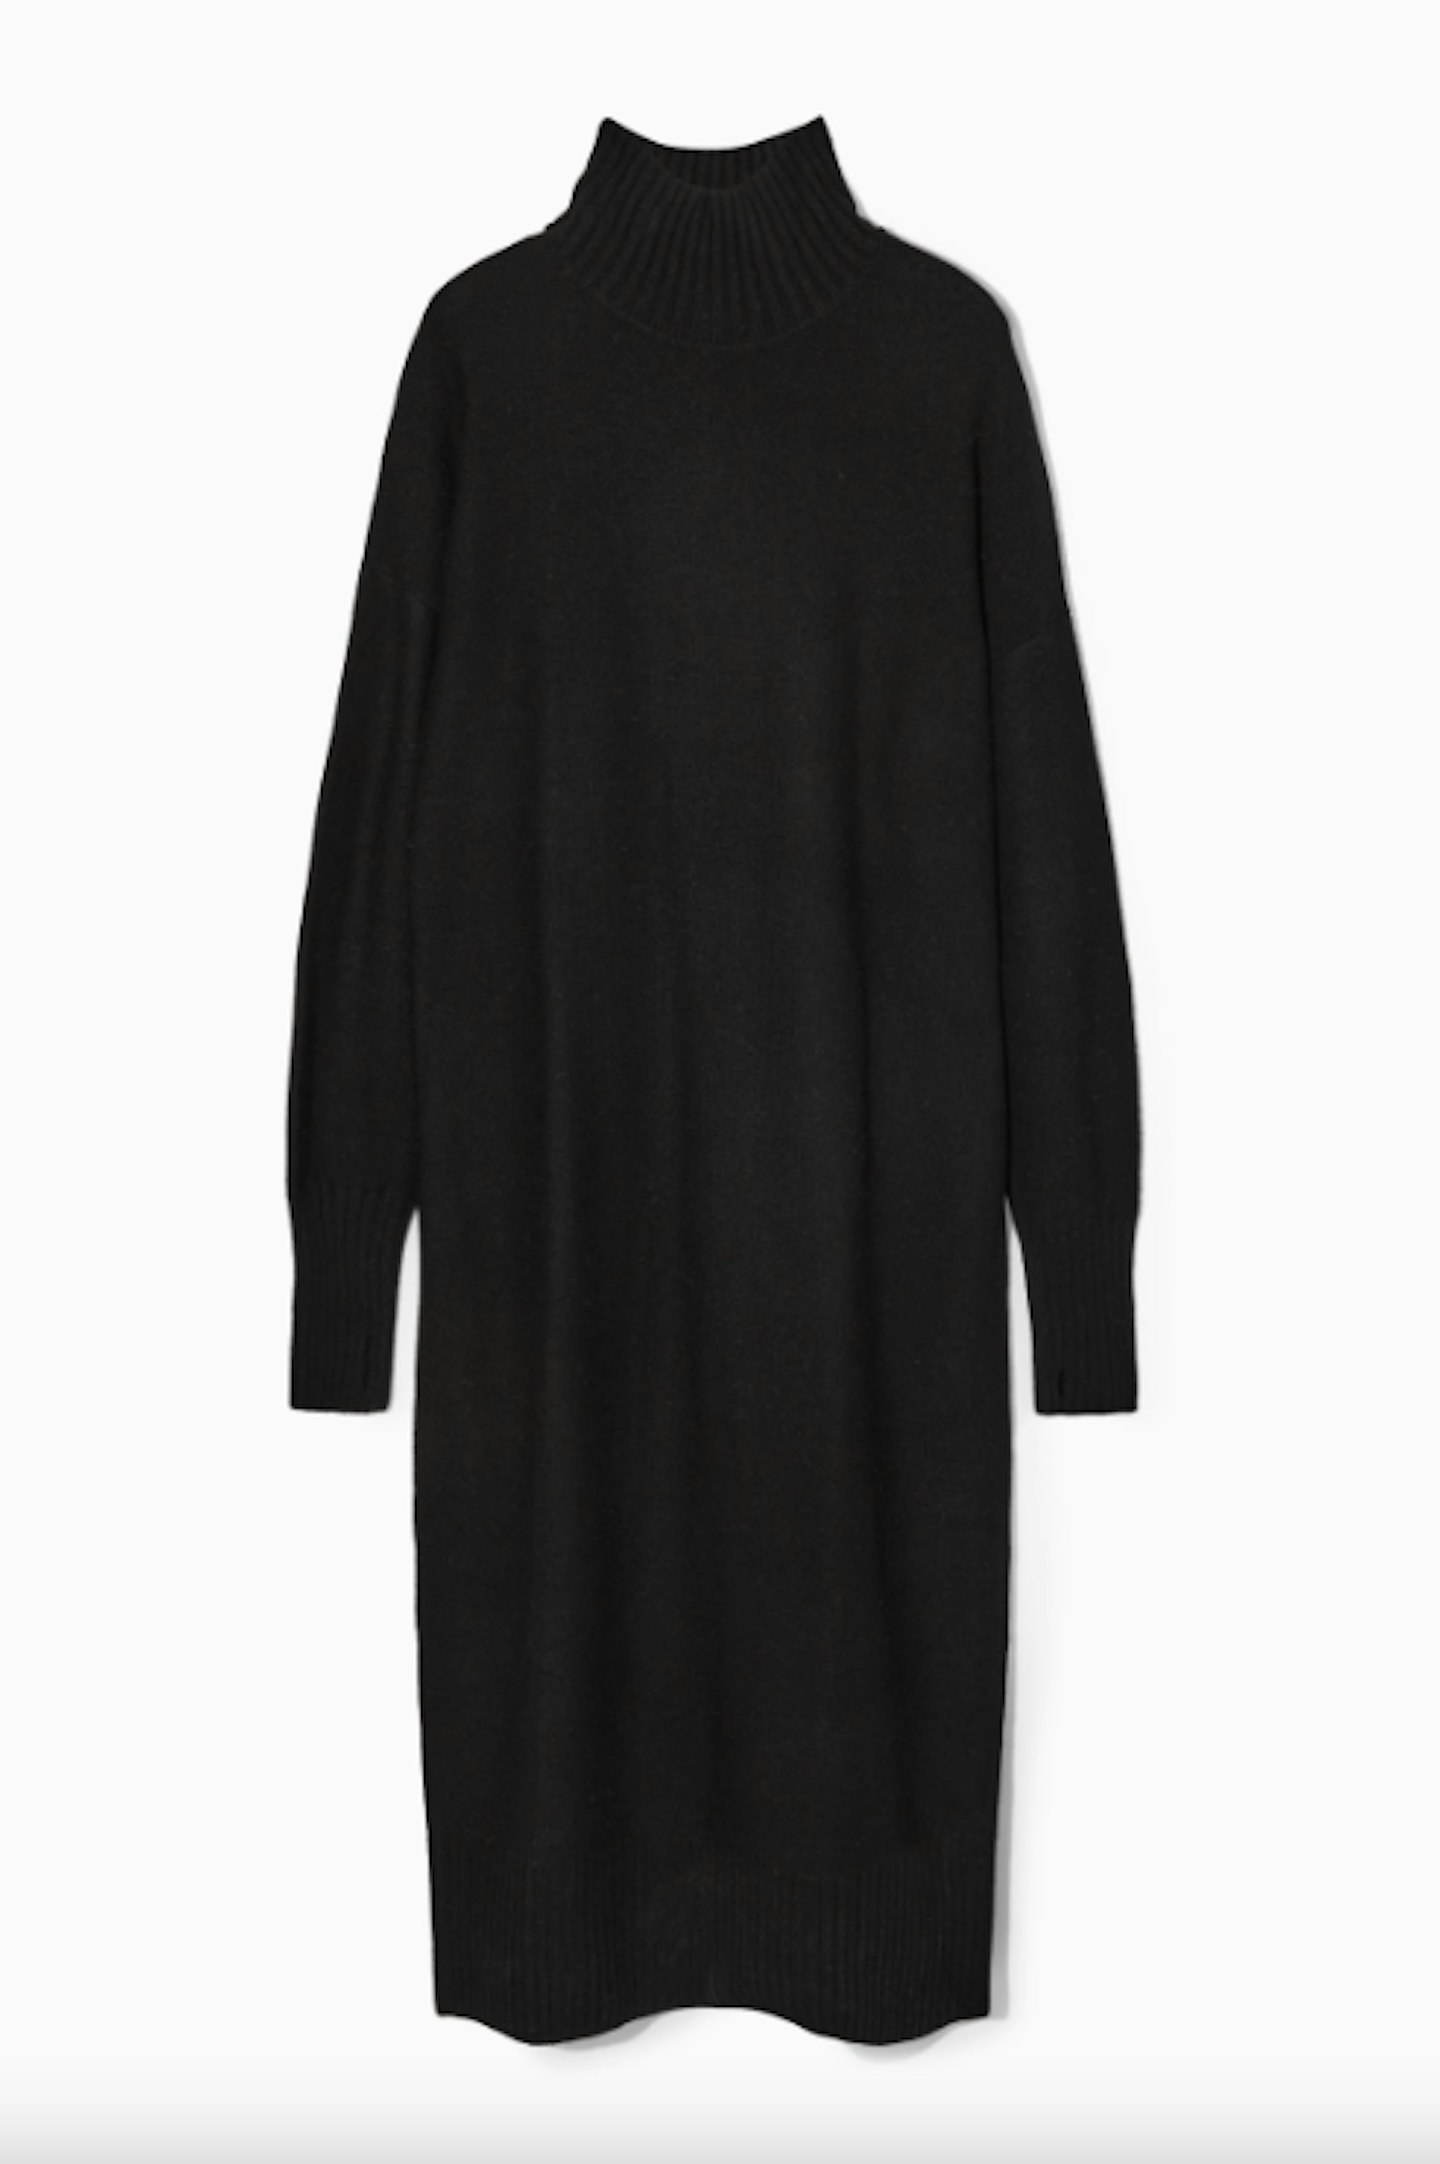 COS, Longline Knitted Dress